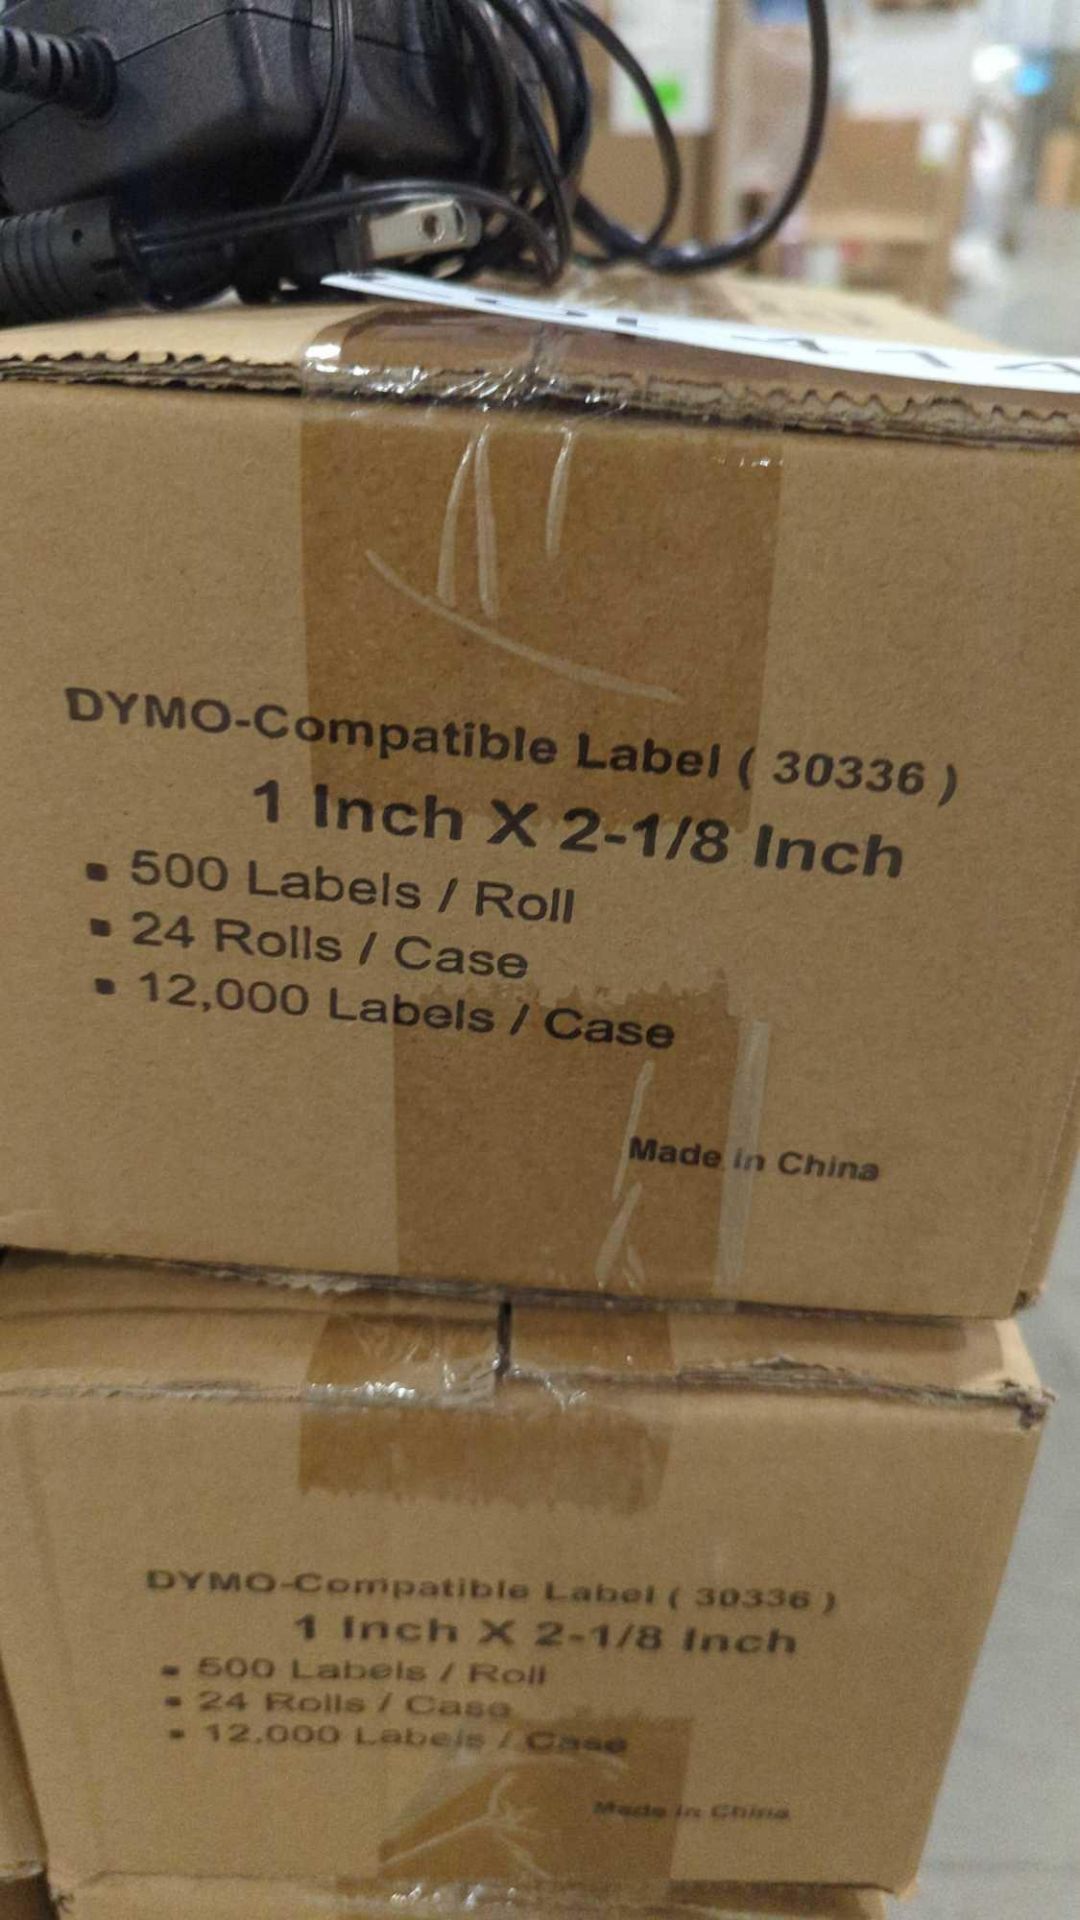 Dymo Labels - Image 5 of 6